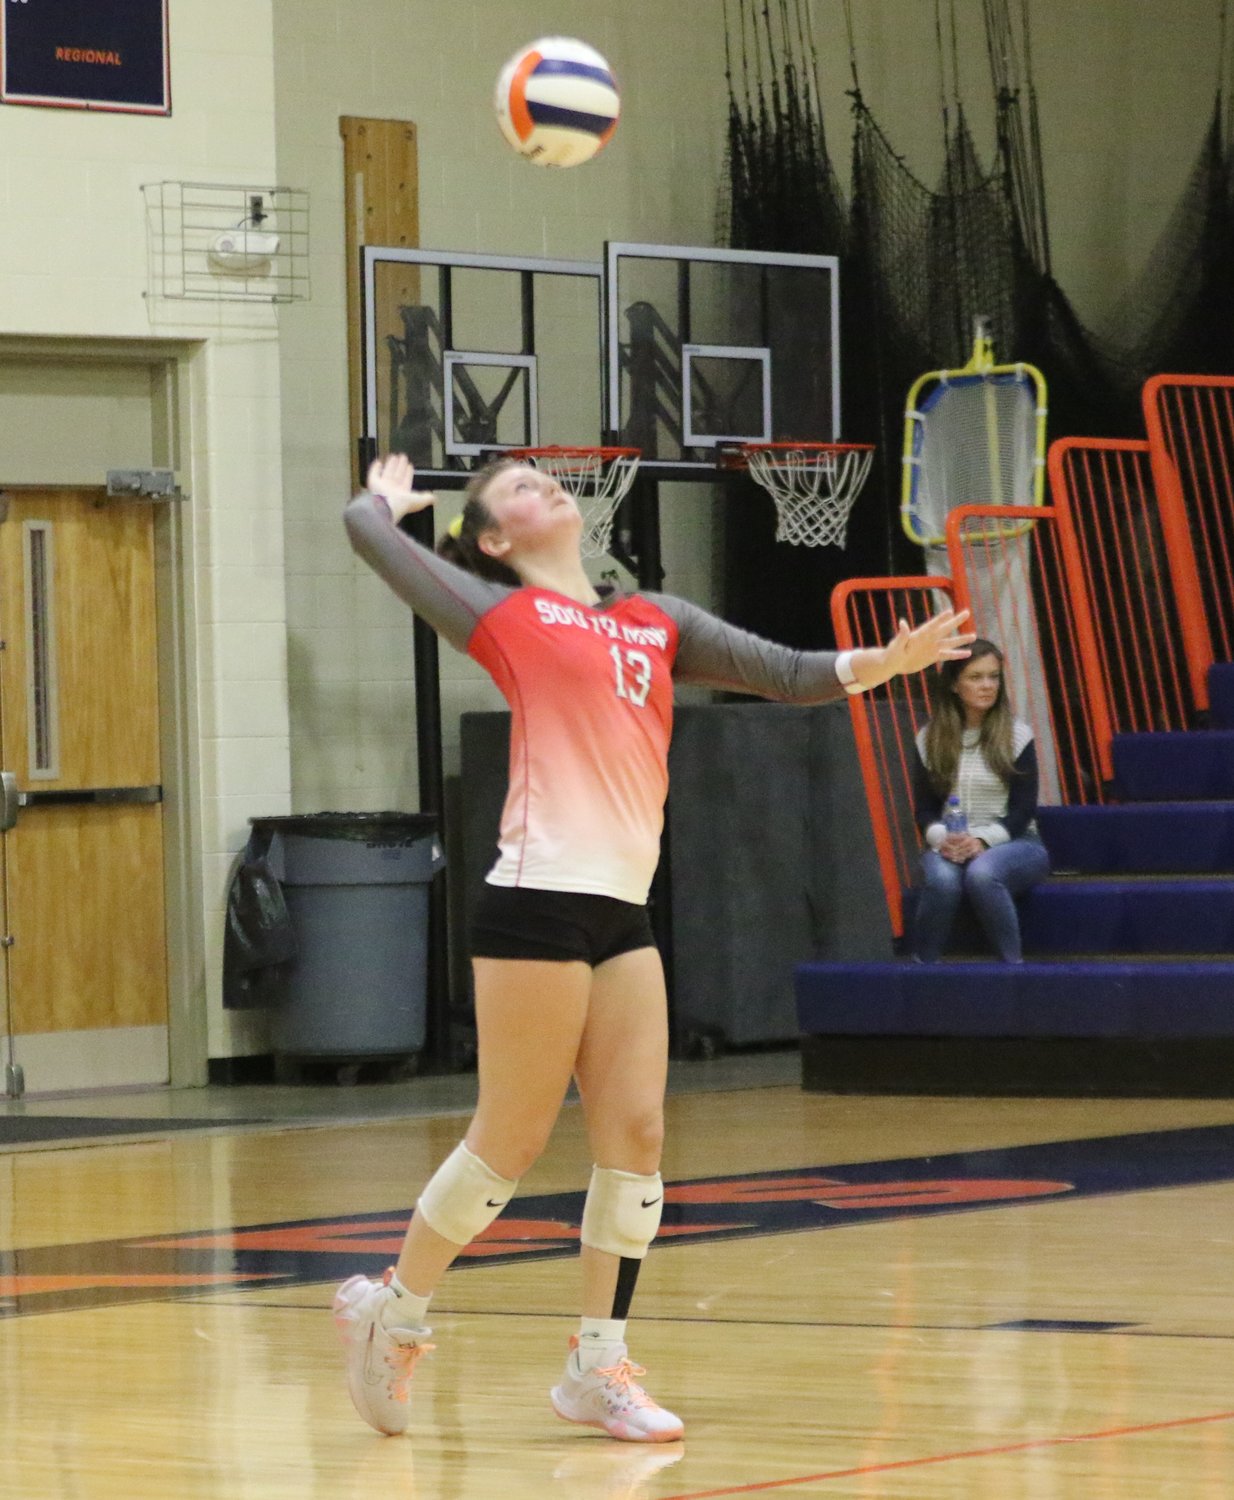 Regan Remley gets ready for a serve.